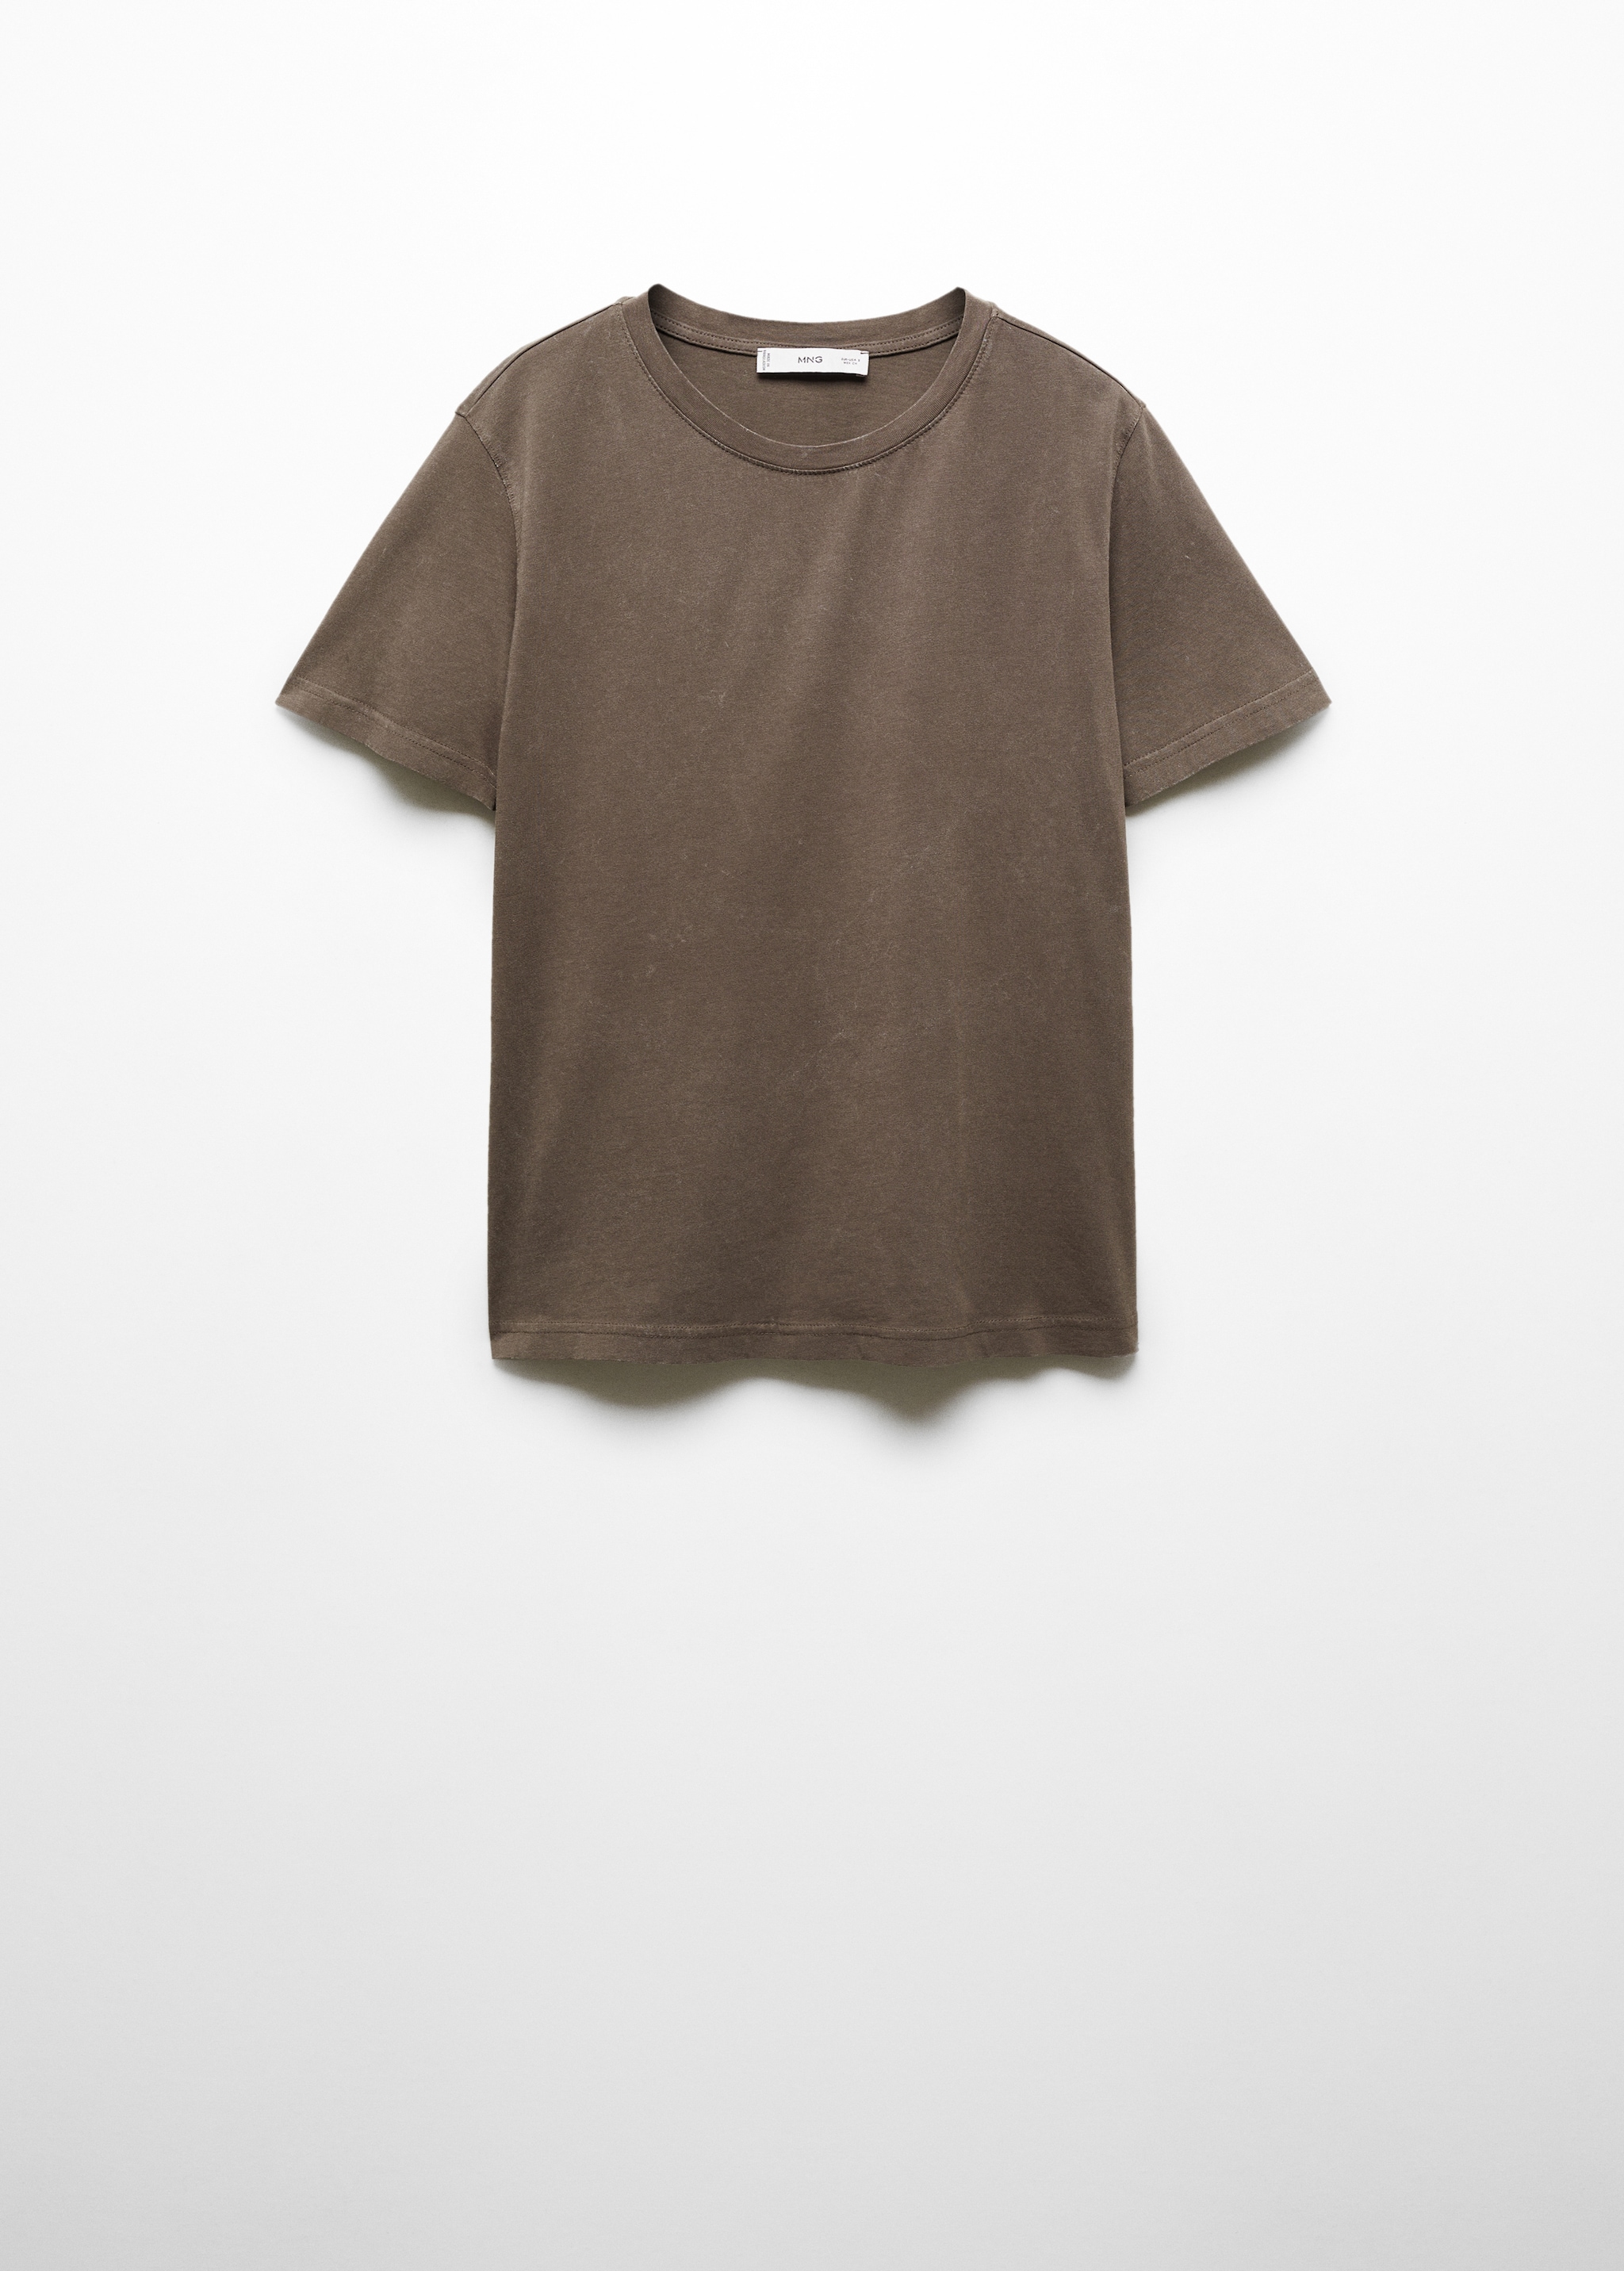 Short-sleeved cotton t-shirt - Article without model